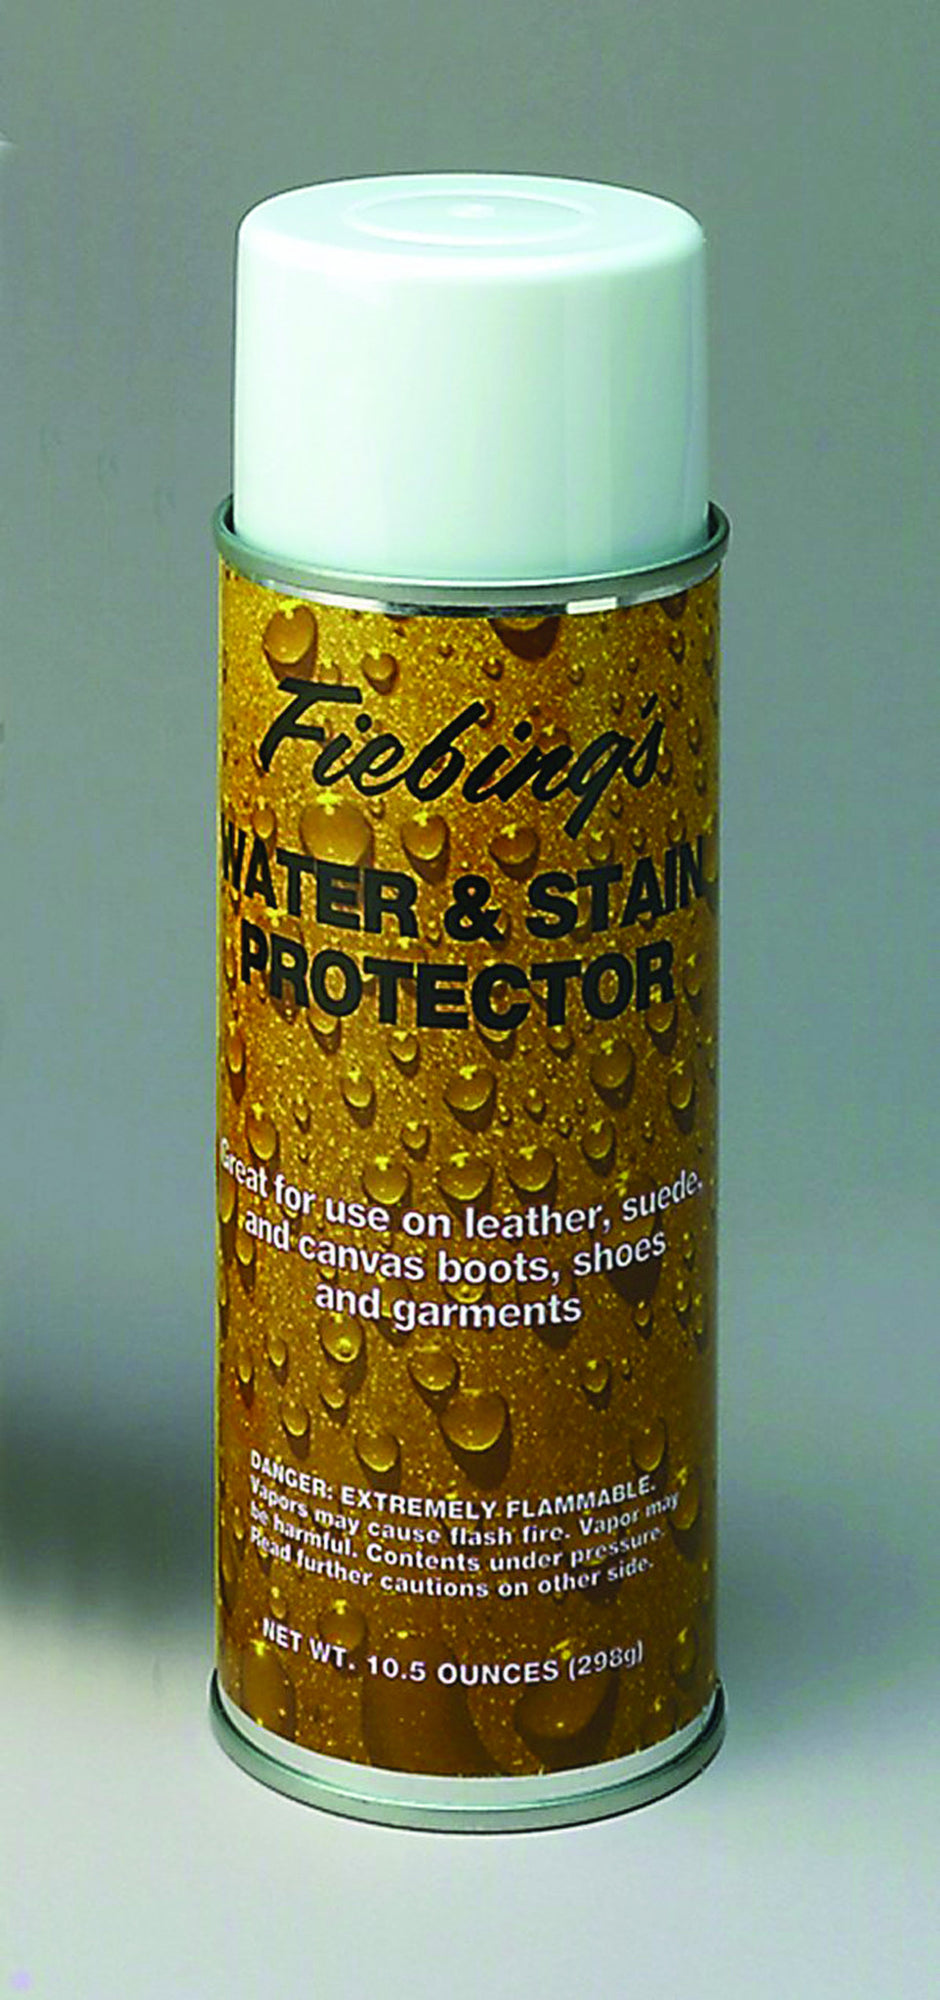 Snow Proof Water & Stain Protector Aerosol